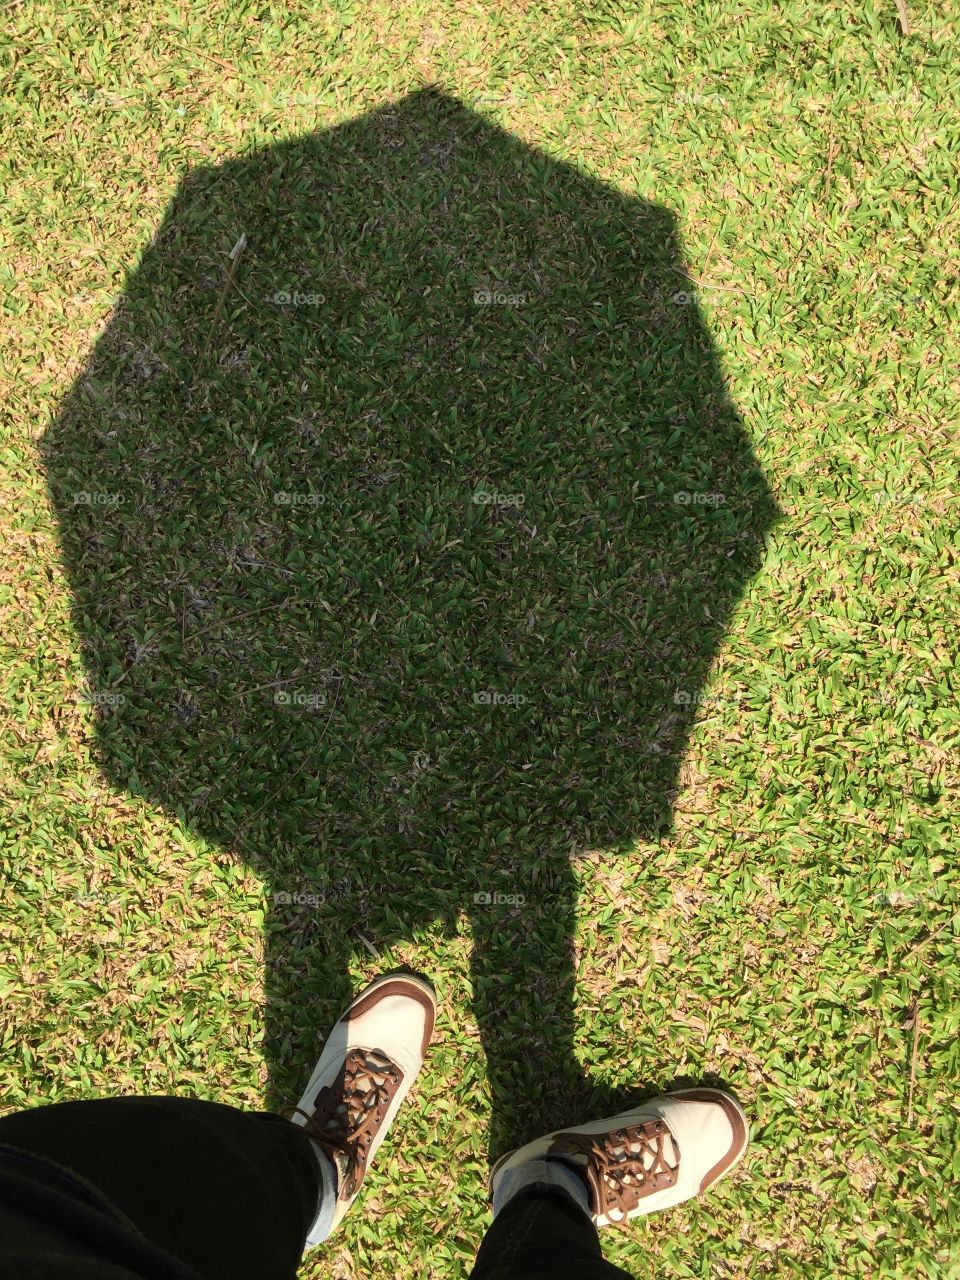 Standing on the grass with my shadow 